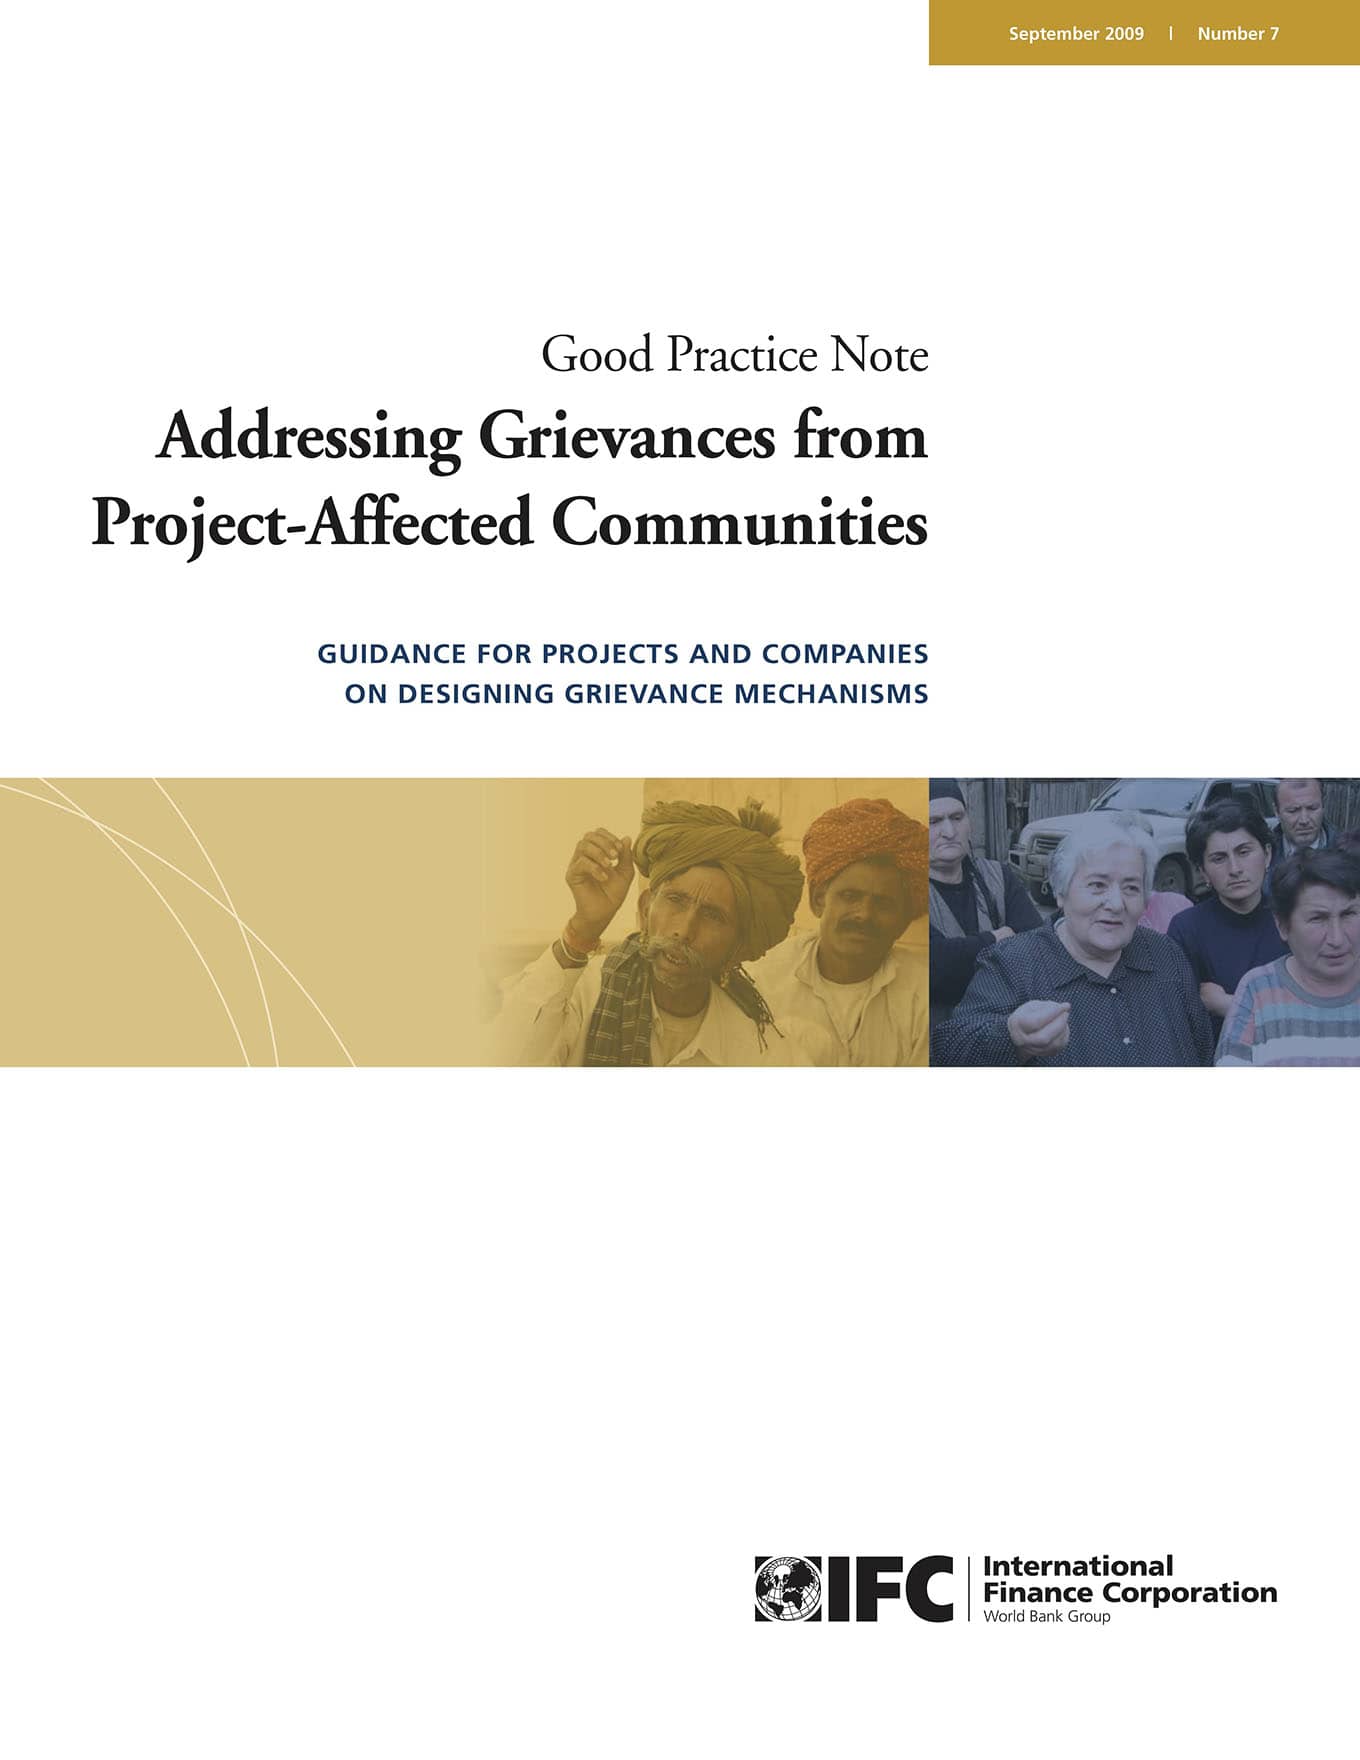 Good Practice Note: Addressing Grievances from Project-Affected Communities (IFC, 2009)